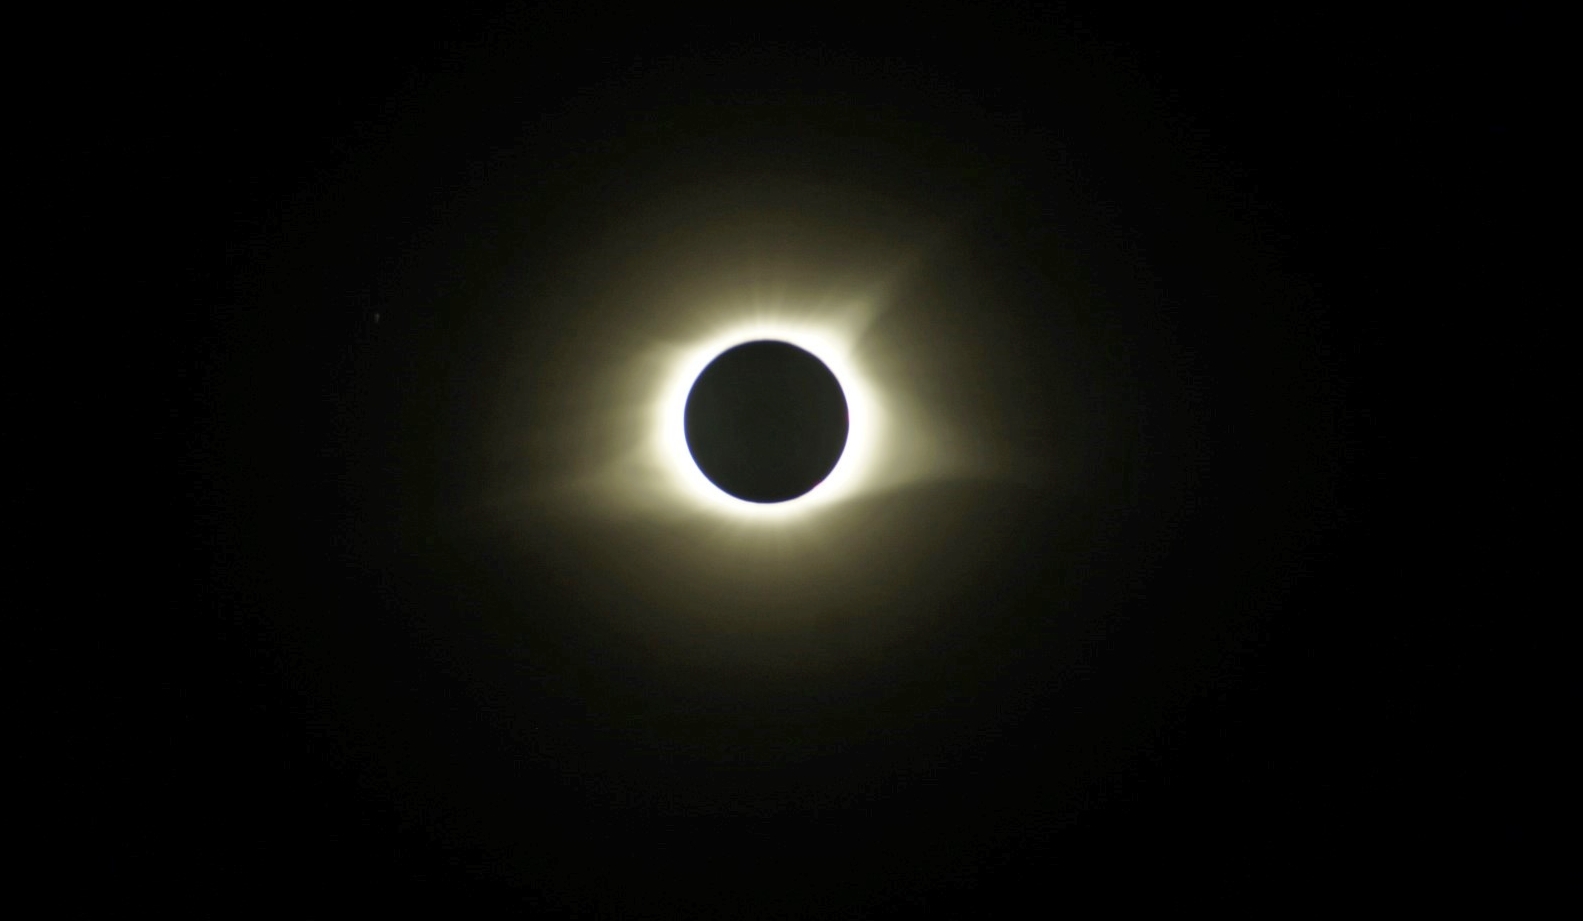 The totality stage of the Great American Eclipse